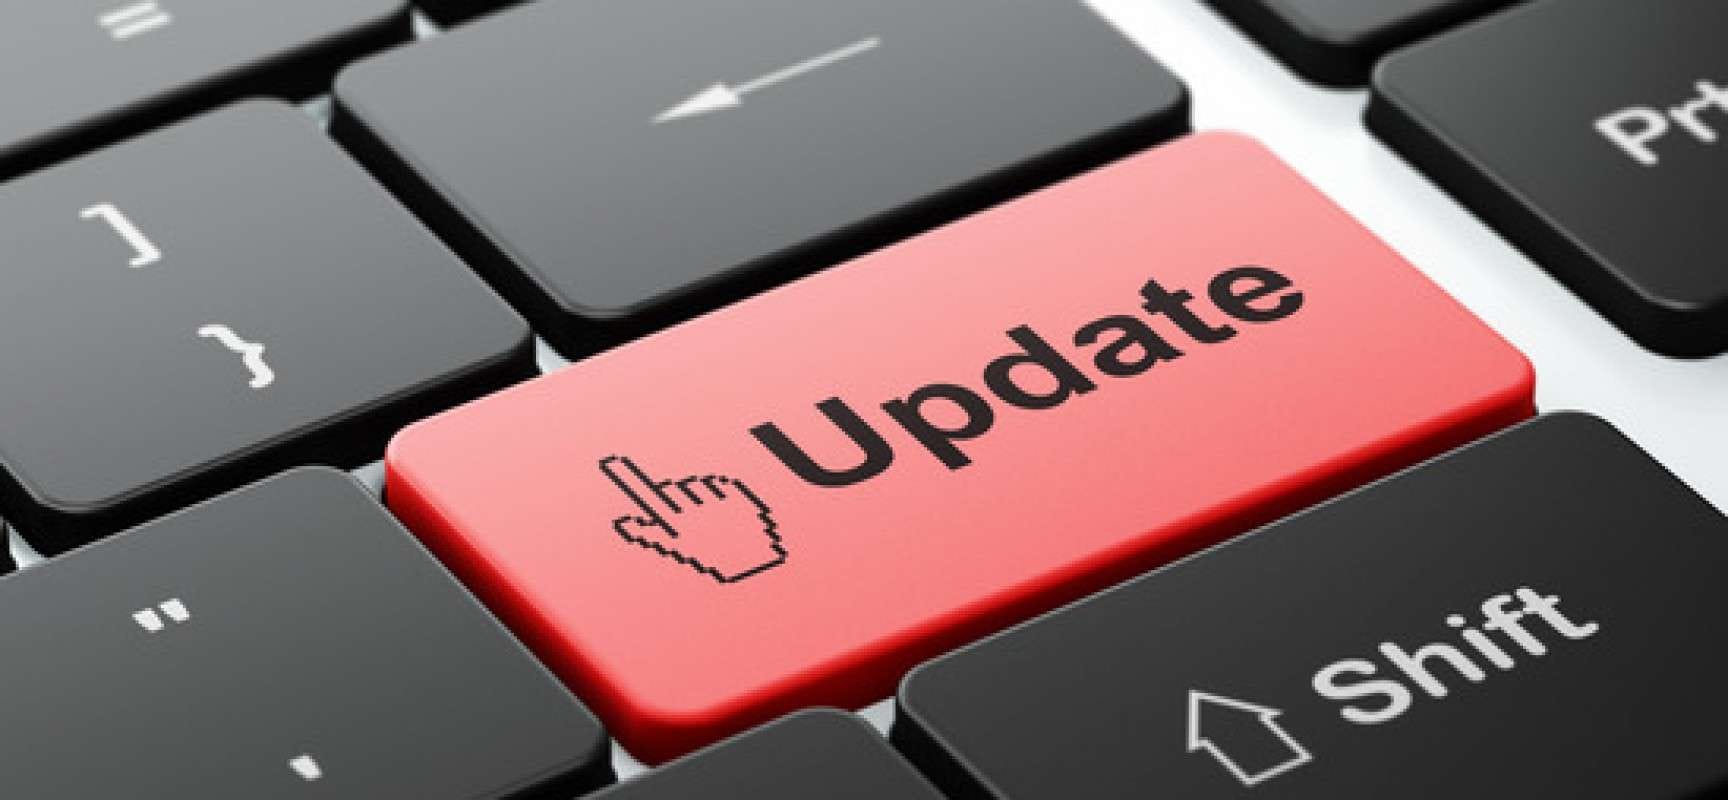 update apps and operating system